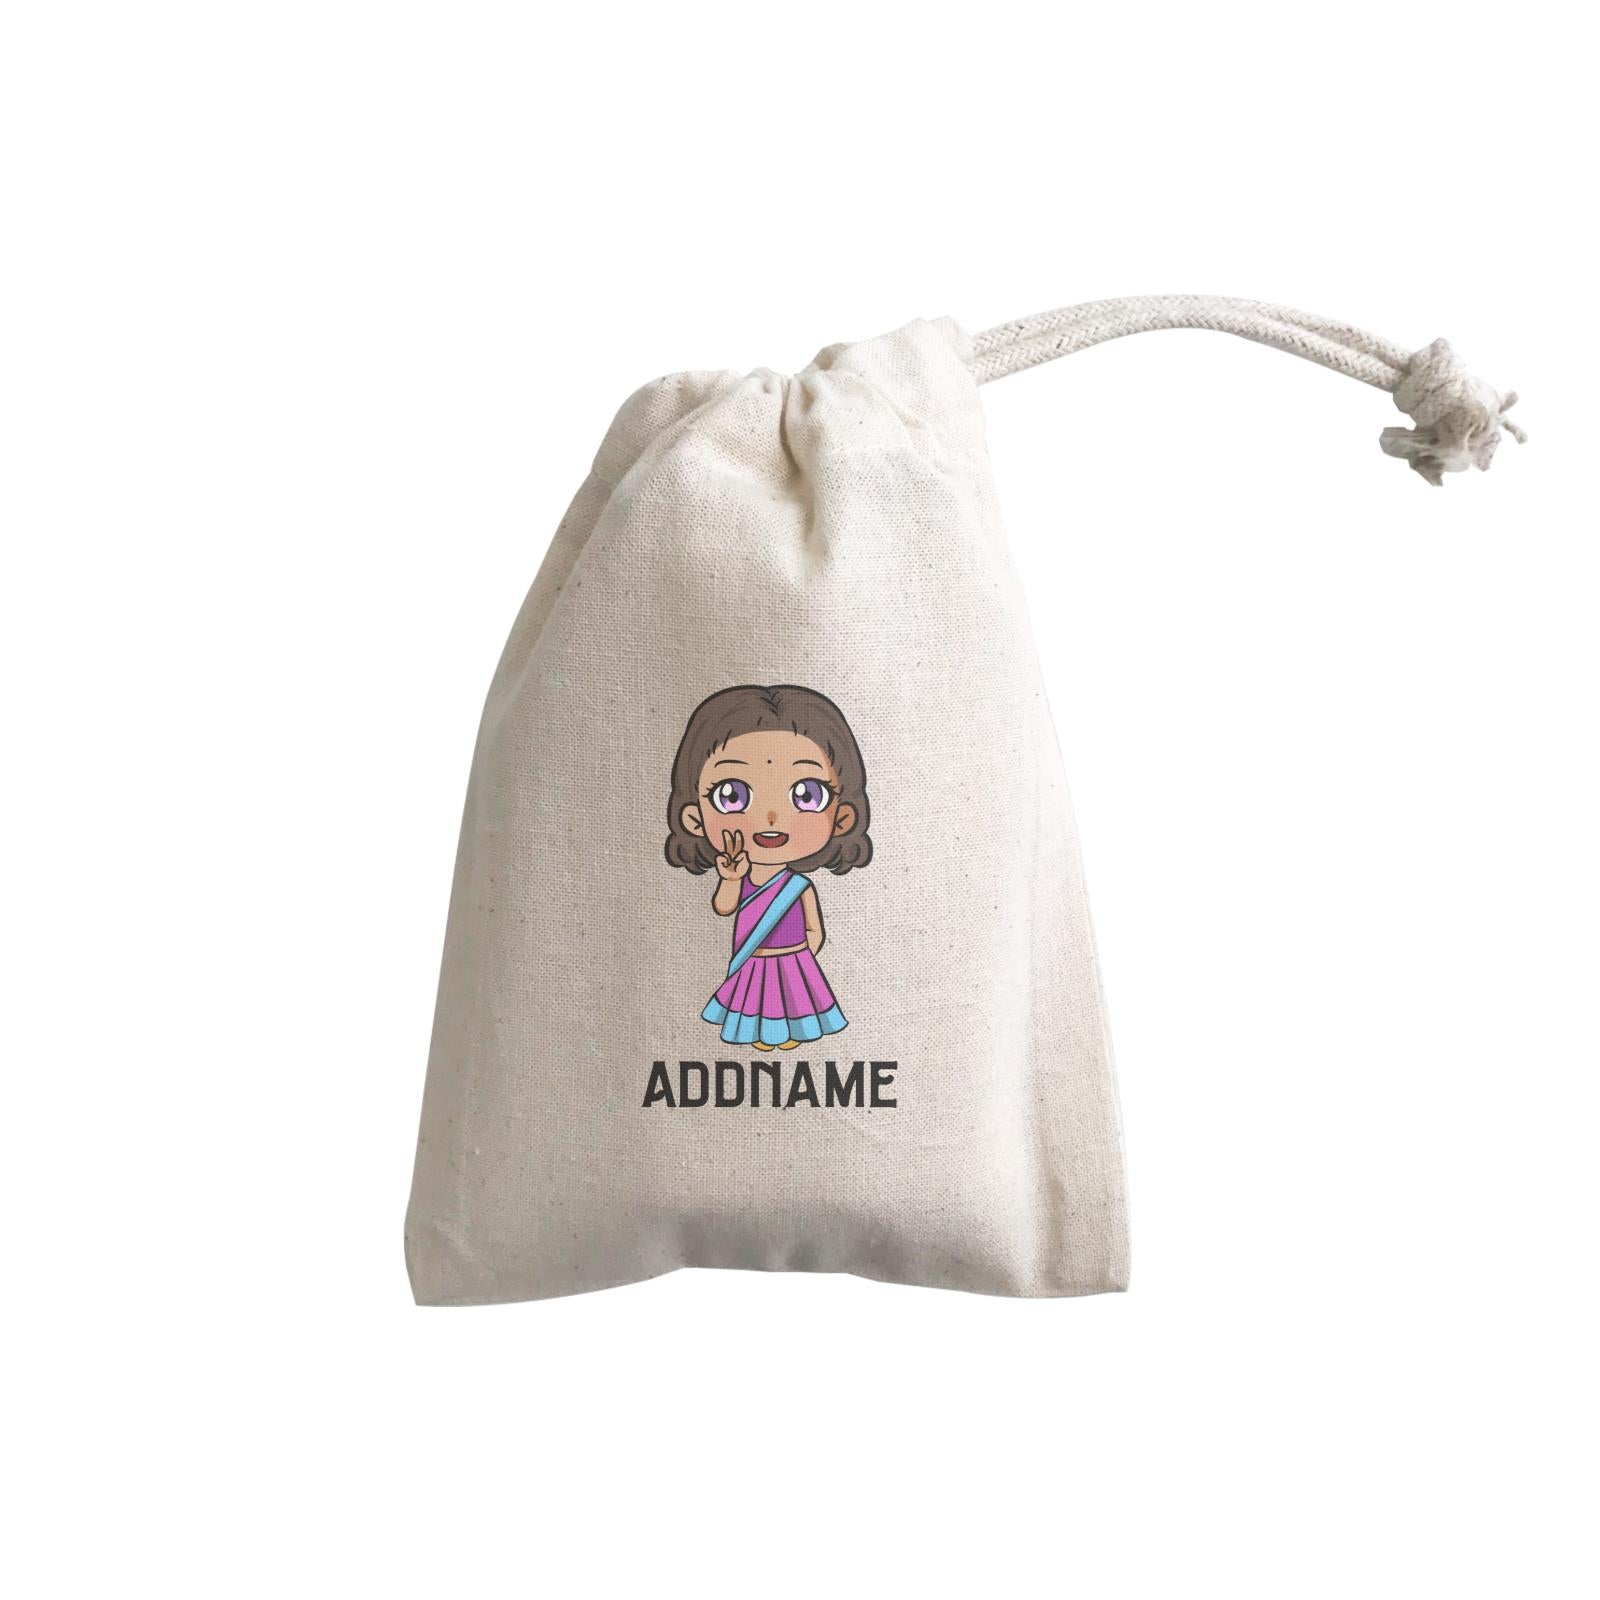 Deepavali Series Chibi Little Girl Front Addname GP Gift Pouch